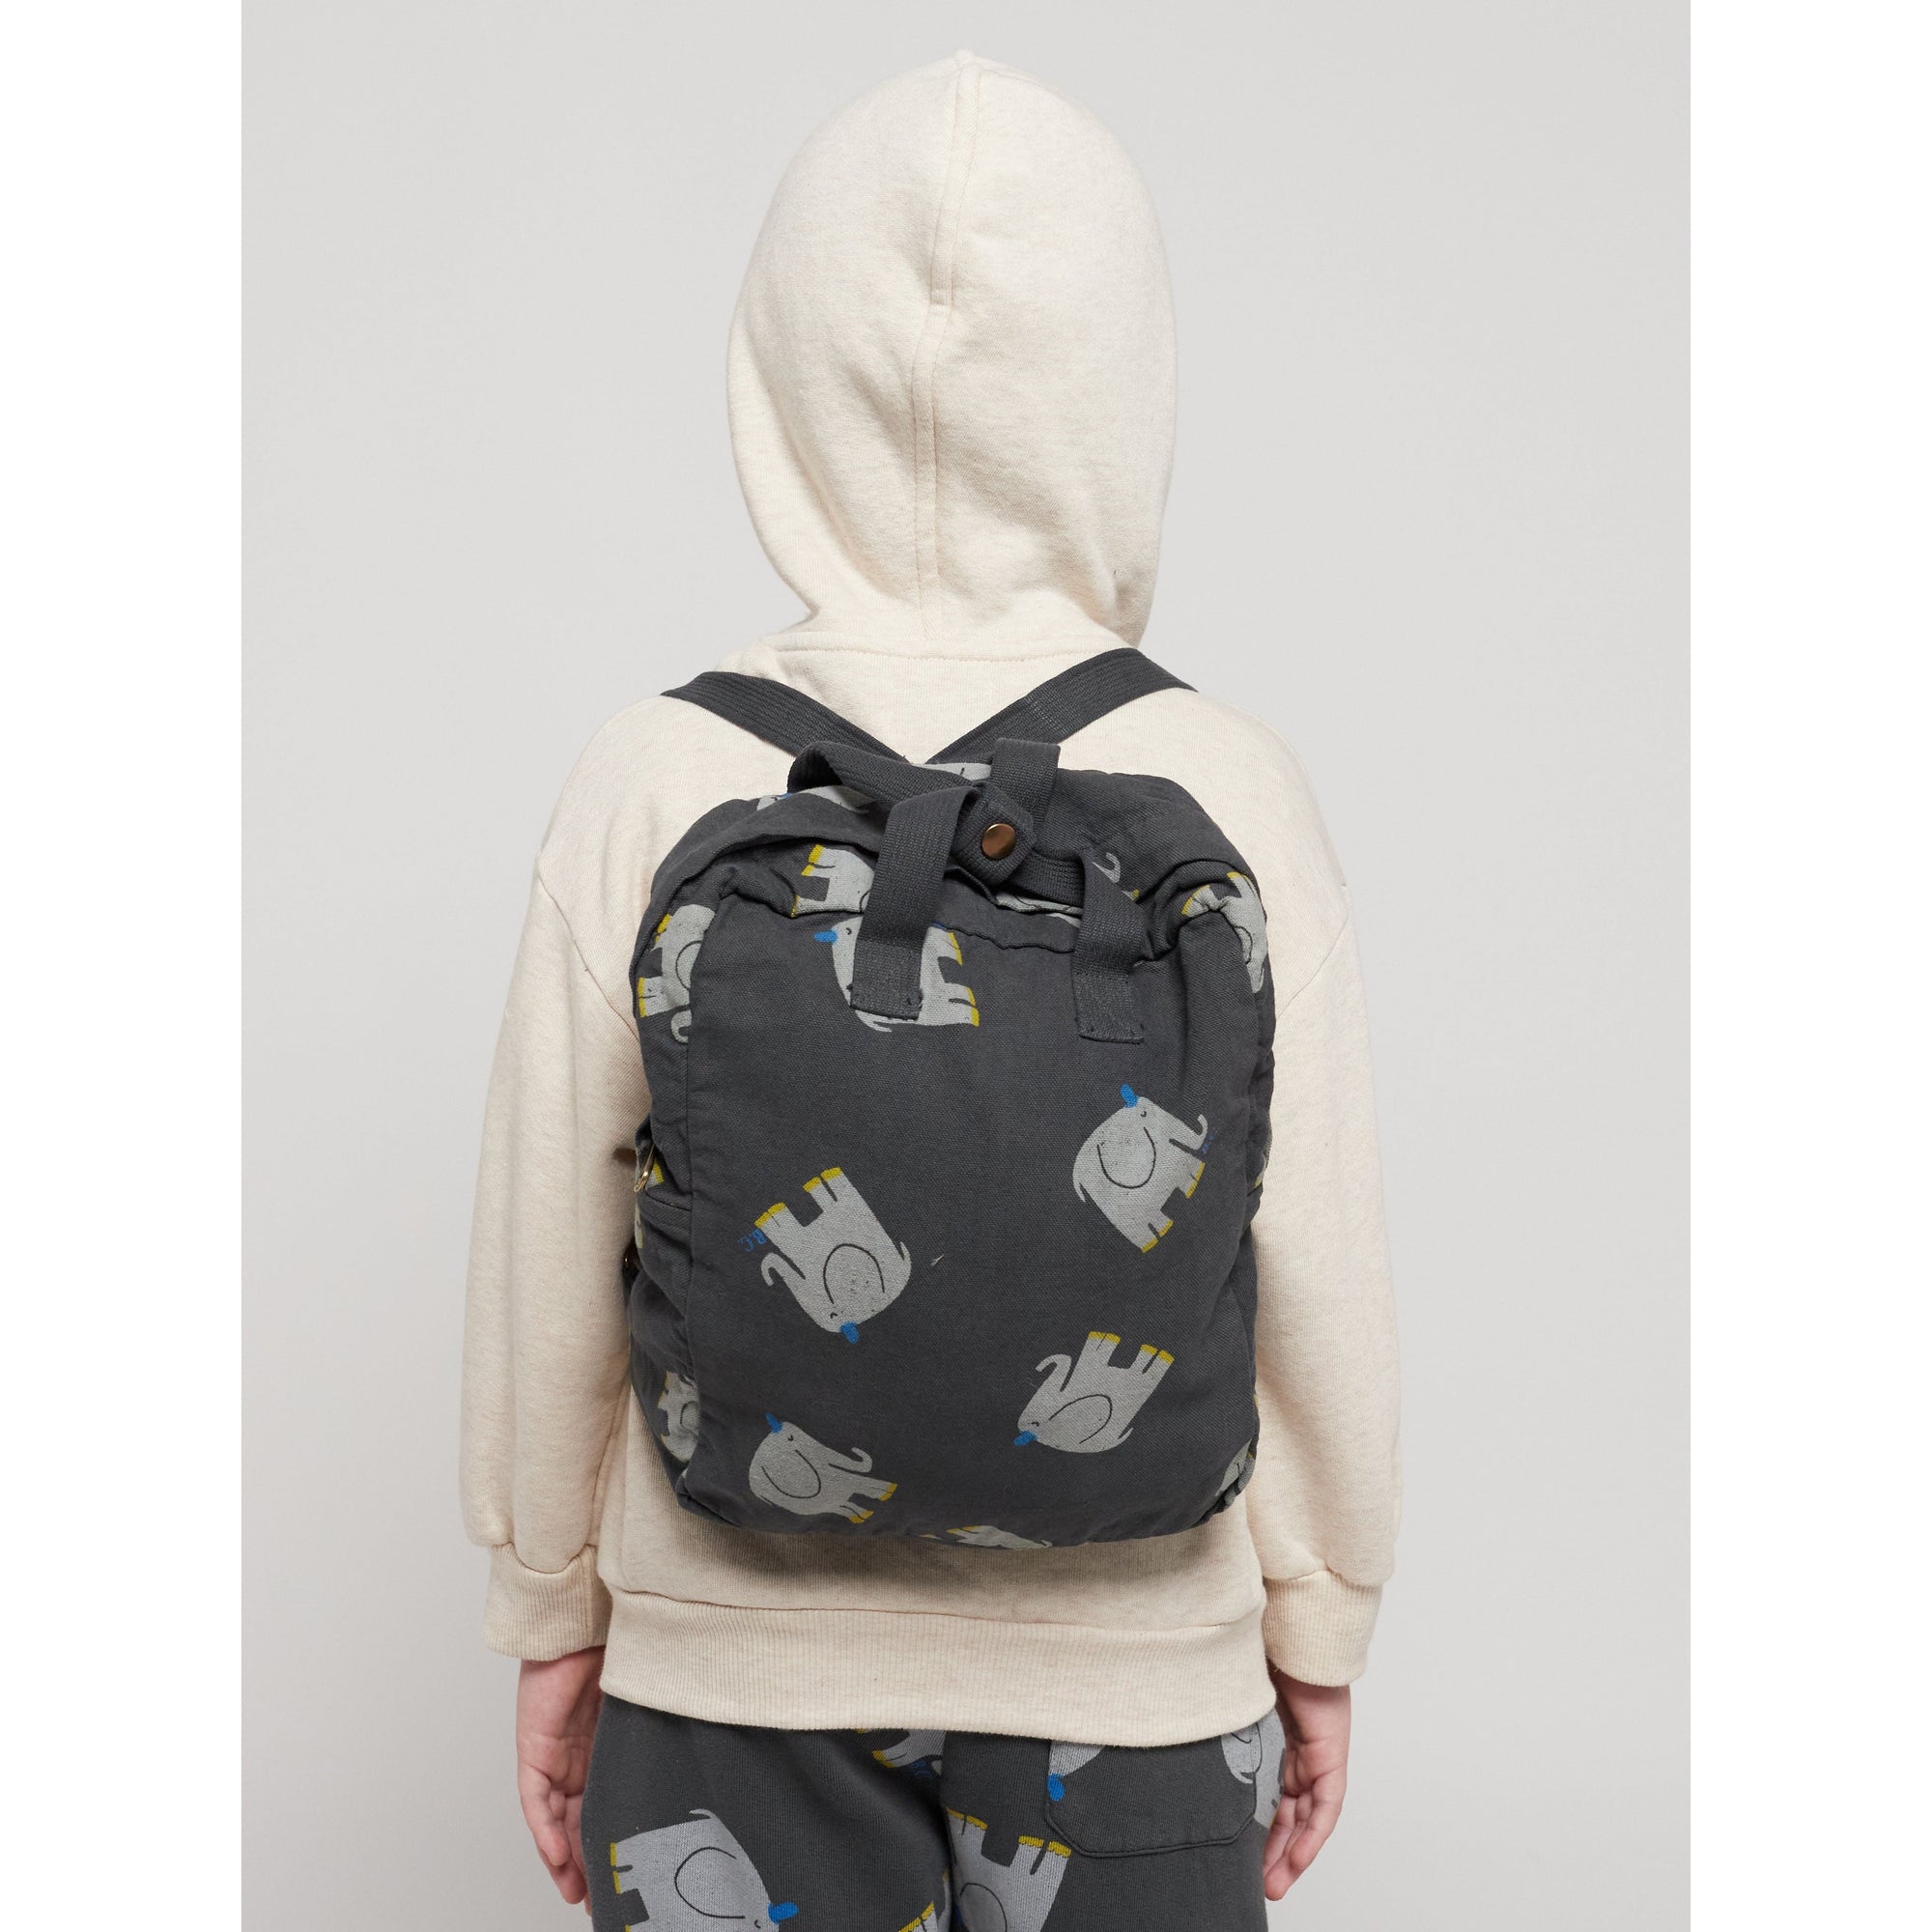 The Elefant All Over Schoolbag